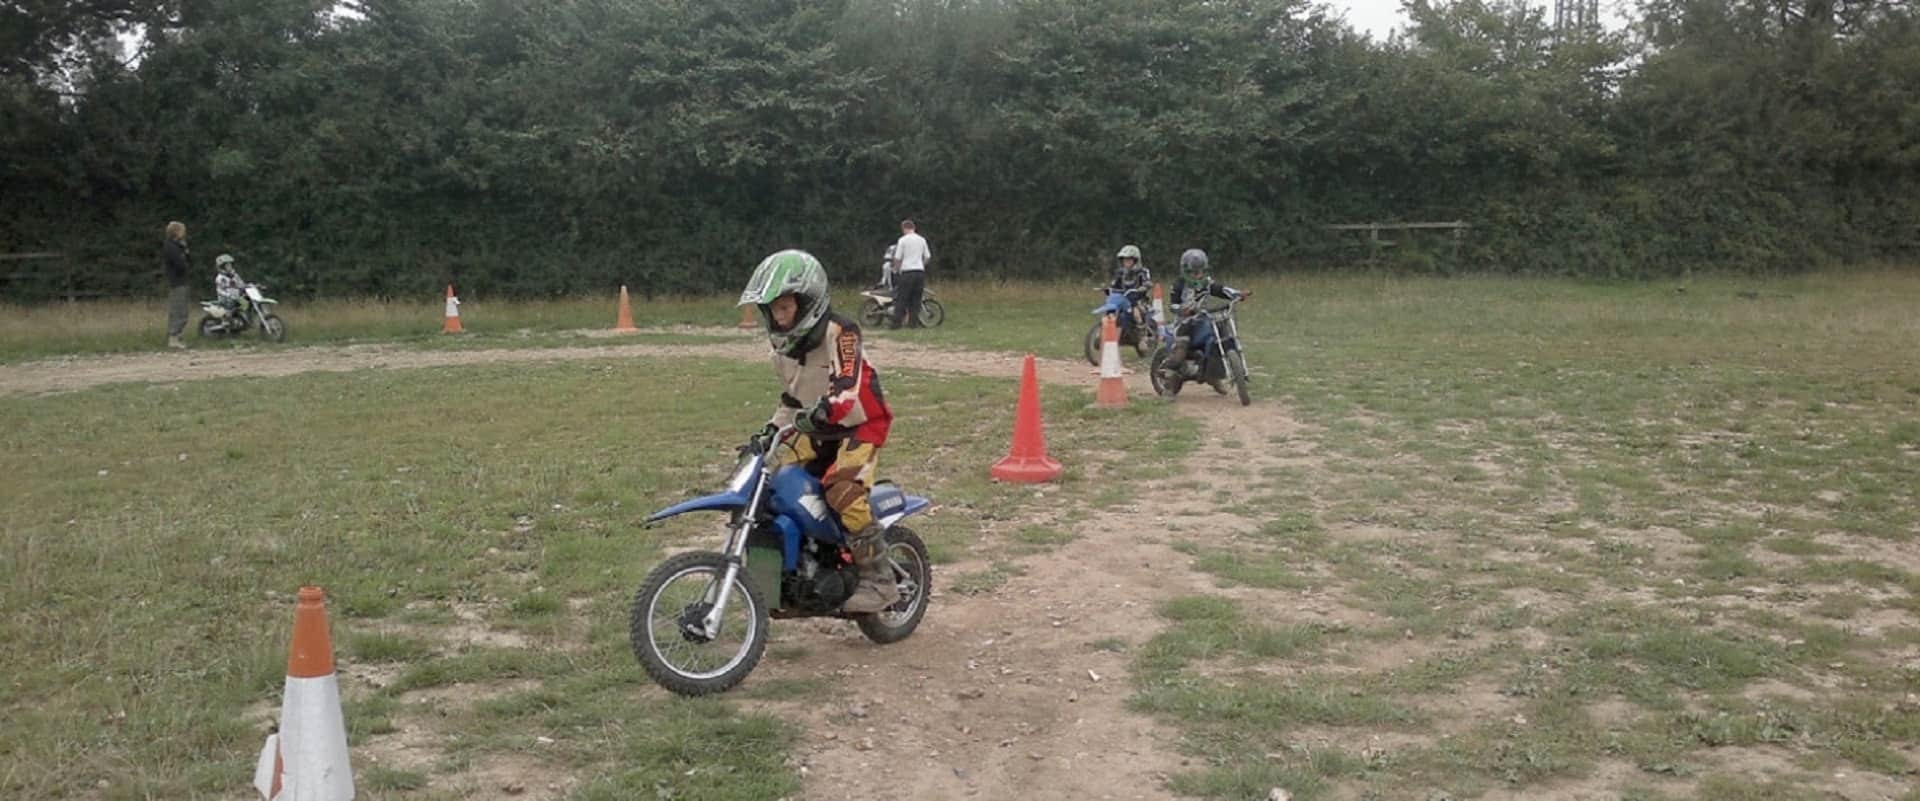 Chiltern Young Riders Motocross Track in UK